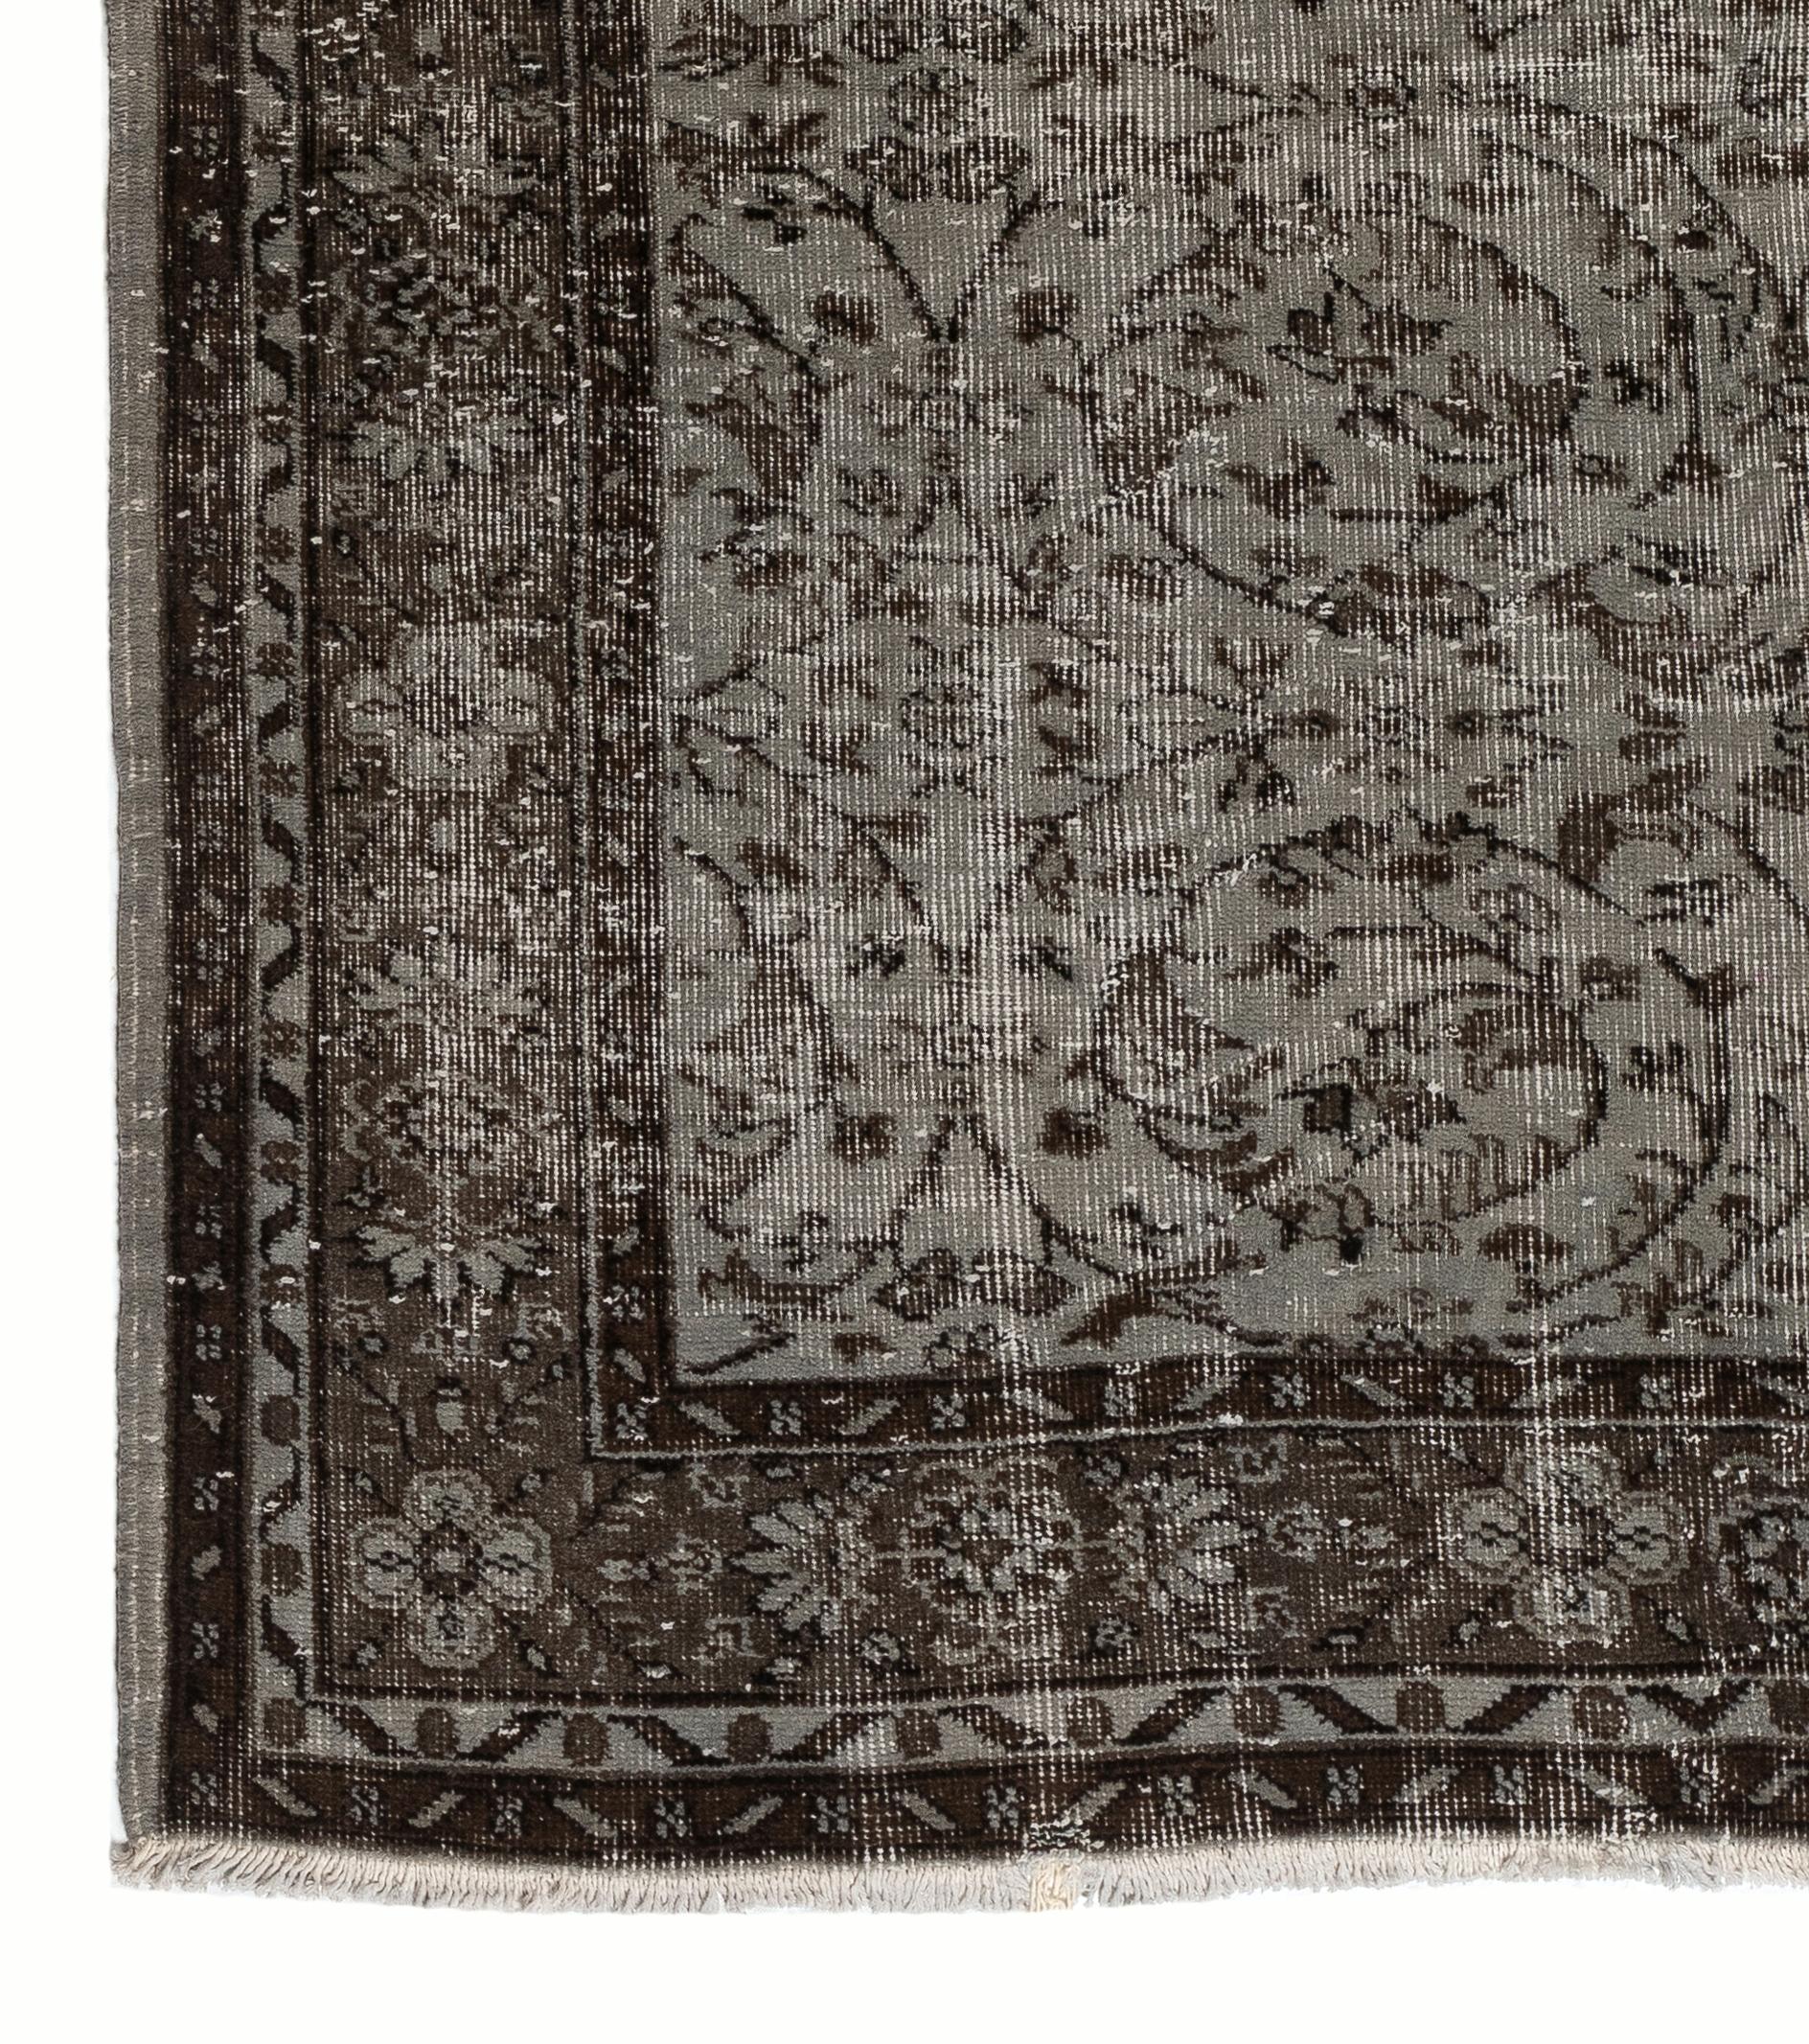 Hand-Knotted 5.9x9.5 Ft Vintage Floral Motif Handmade Area Rug in Gray. Anatolian Wool Carpet For Sale